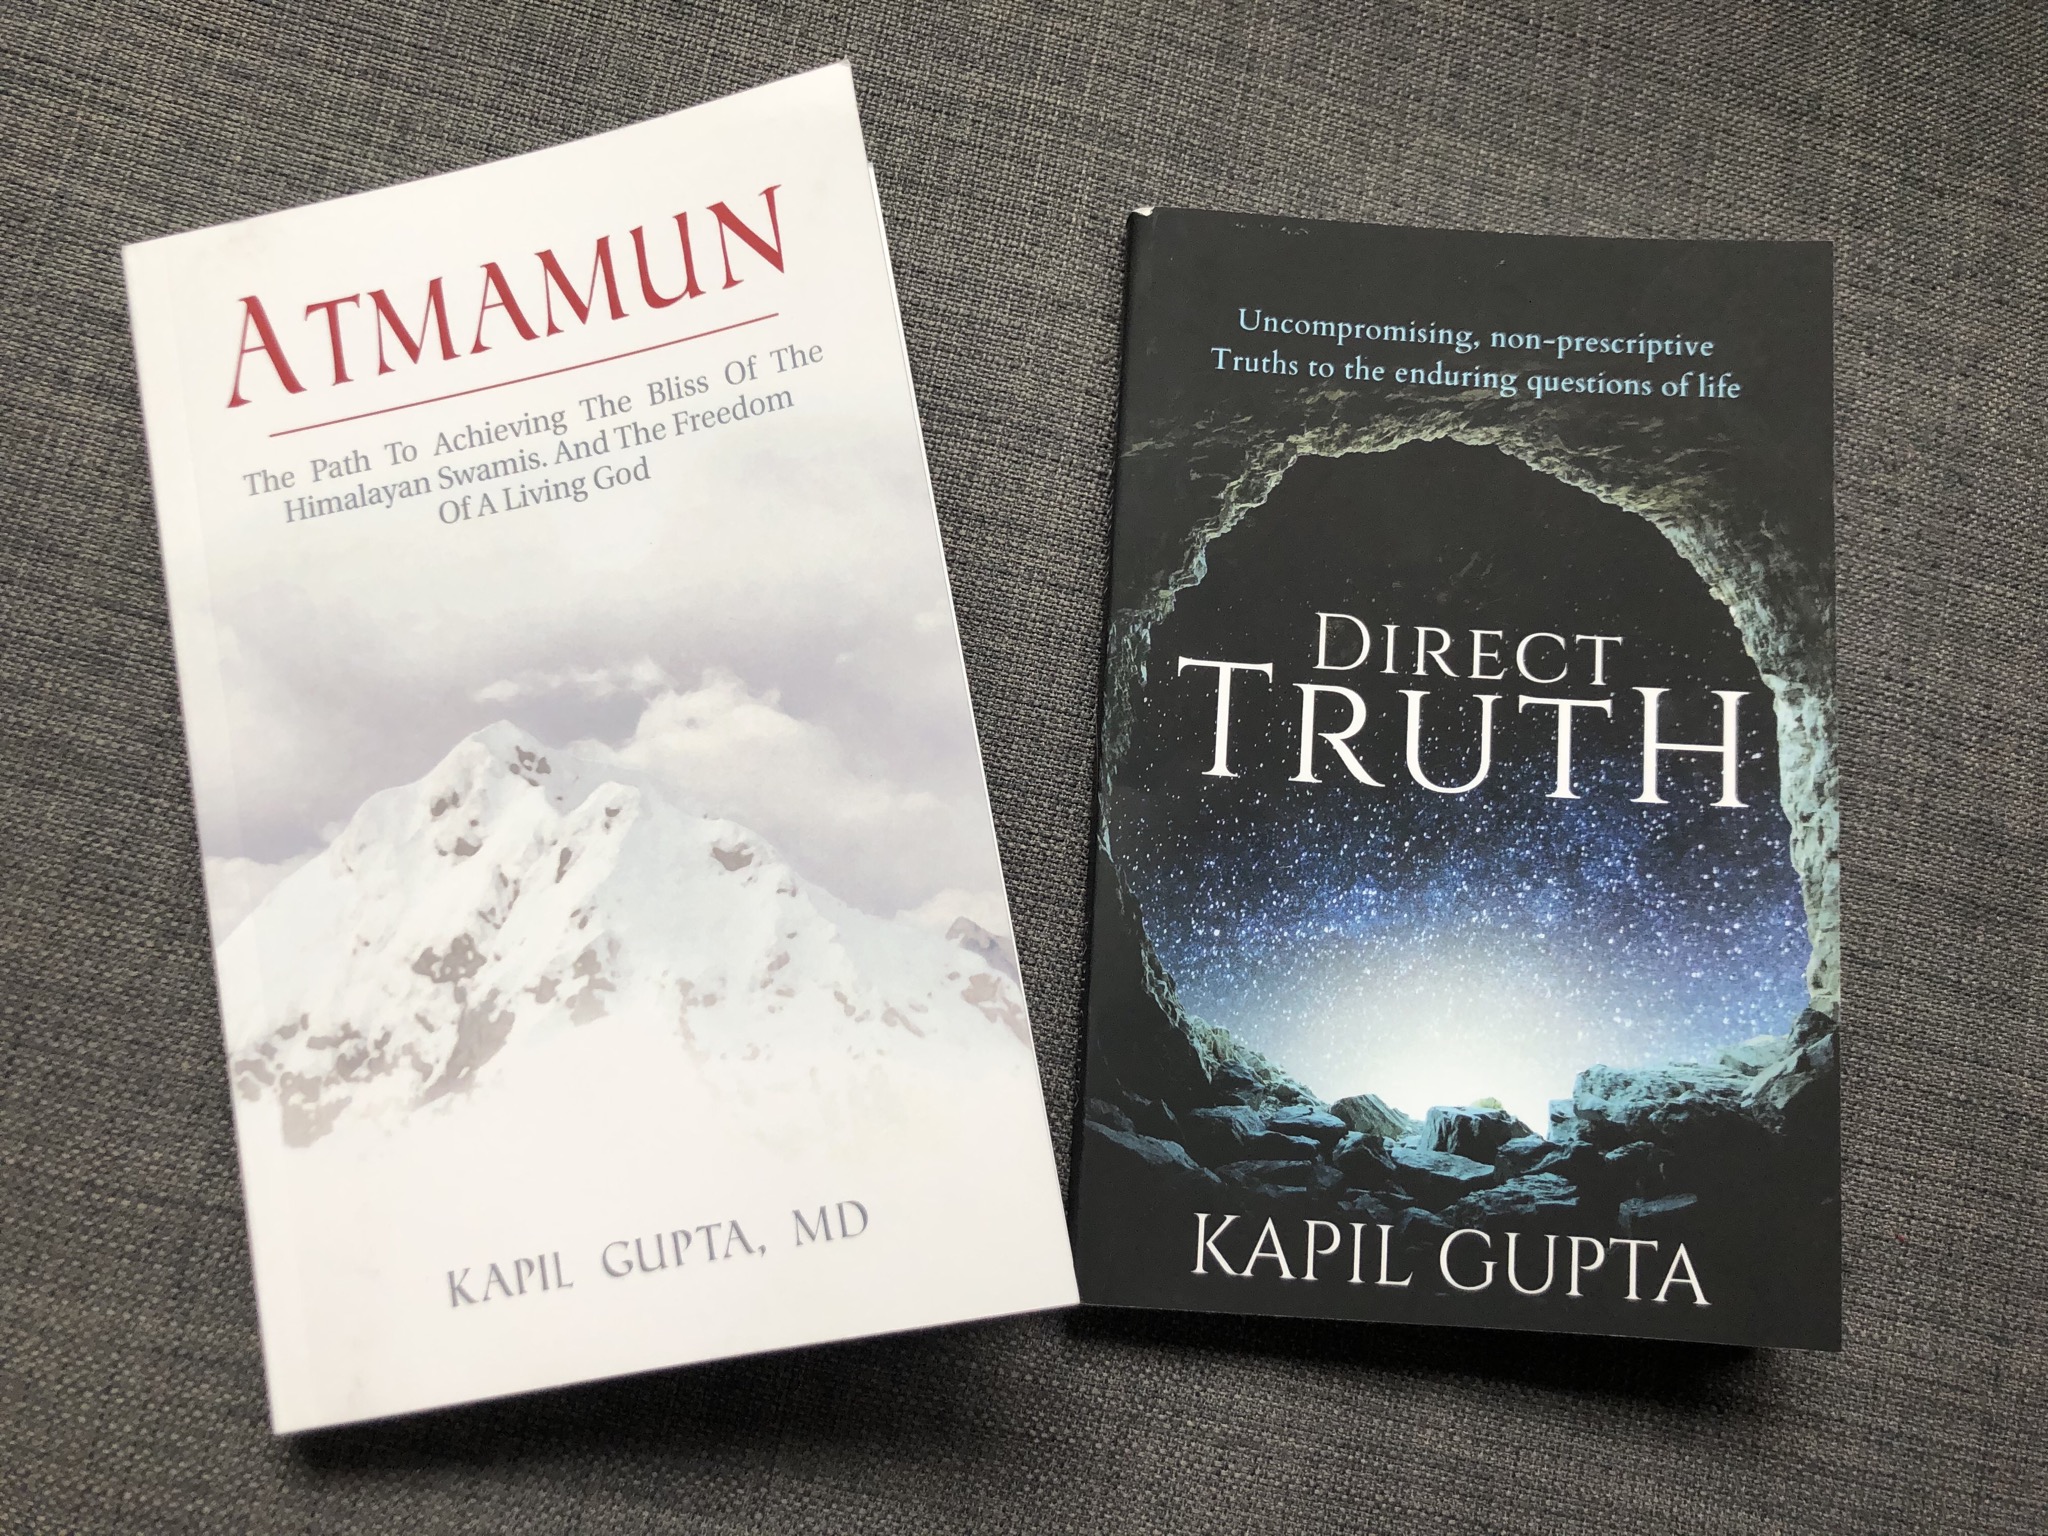 Two of Kapil Gupta's book: Atmamun and Direct Truth